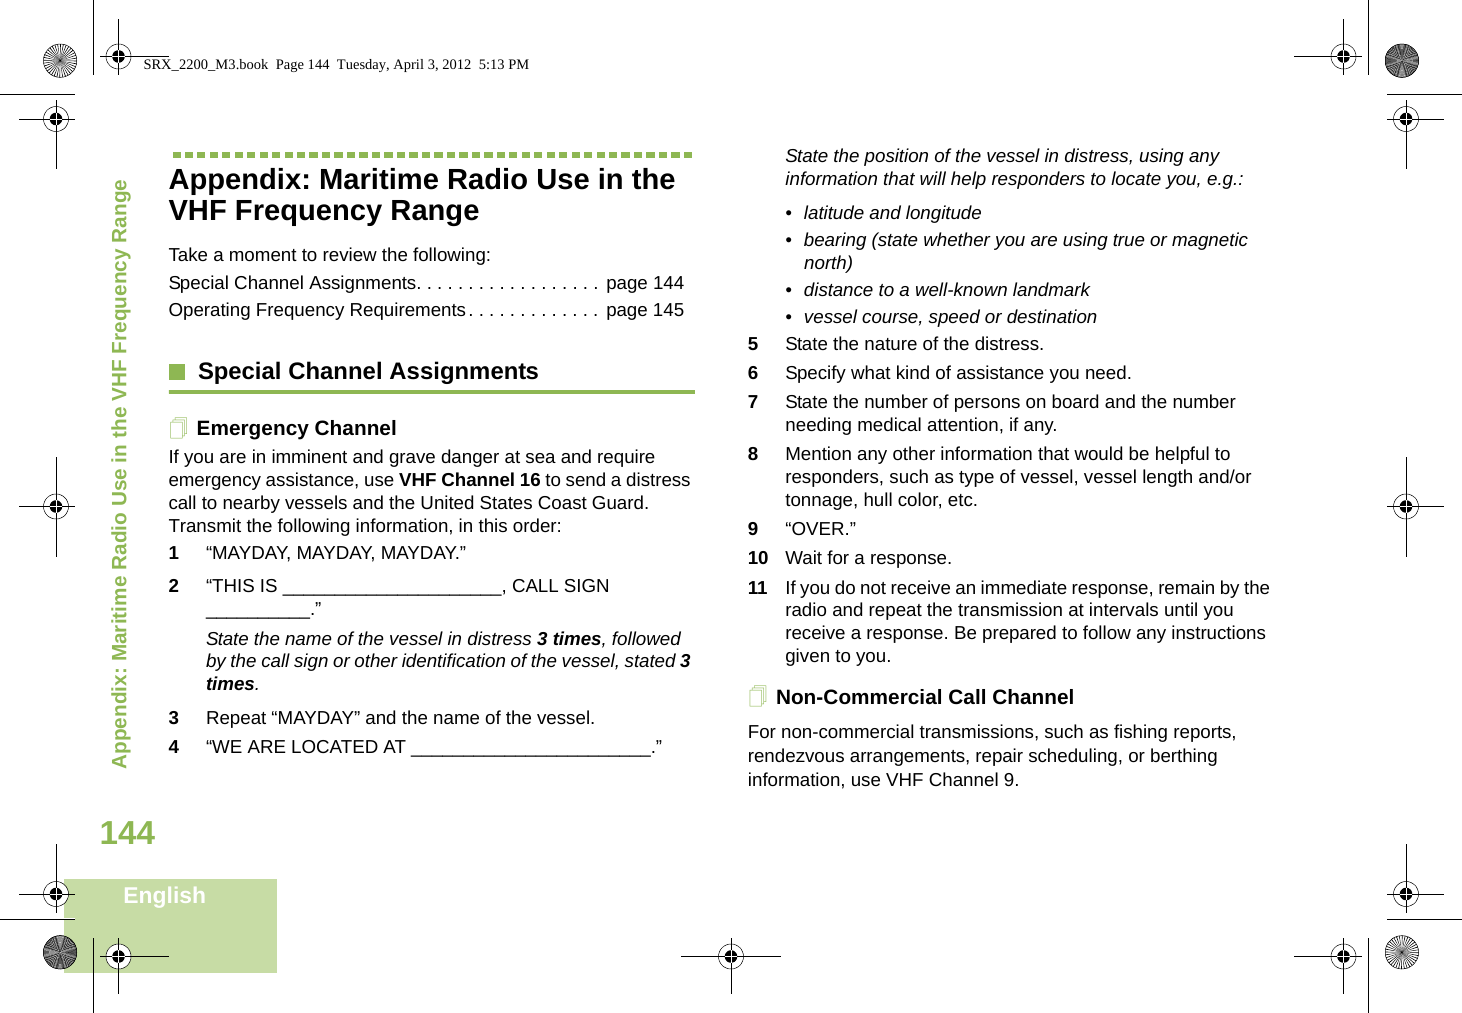 Appendix: Maritime Radio Use in the VHF Frequency RangeEnglish144Appendix: Maritime Radio Use in the VHF Frequency RangeTake a moment to review the following:Special Channel Assignments. . . . . . . . . . . . . . . . . . page 144Operating Frequency Requirements. . . . . . . . . . . . . page 145Special Channel AssignmentsEmergency ChannelIf you are in imminent and grave danger at sea and require emergency assistance, use VHF Channel 16 to send a distress call to nearby vessels and the United States Coast Guard. Transmit the following information, in this order:1“MAYDAY, MAYDAY, MAYDAY.” 2“THIS IS _____________________, CALL SIGN __________.”State the name of the vessel in distress 3 times, followed by the call sign or other identification of the vessel, stated 3 times.3Repeat “MAYDAY” and the name of the vessel. 4“WE ARE LOCATED AT _______________________.”State the position of the vessel in distress, using any information that will help responders to locate you, e.g.: • latitude and longitude • bearing (state whether you are using true or magnetic north) • distance to a well-known landmark• vessel course, speed or destination5State the nature of the distress. 6Specify what kind of assistance you need. 7State the number of persons on board and the number needing medical attention, if any.8Mention any other information that would be helpful to responders, such as type of vessel, vessel length and/or tonnage, hull color, etc.9“OVER.”10 Wait for a response. 11 If you do not receive an immediate response, remain by the radio and repeat the transmission at intervals until you receive a response. Be prepared to follow any instructions given to you.Non-Commercial Call ChannelFor non-commercial transmissions, such as fishing reports, rendezvous arrangements, repair scheduling, or berthing information, use VHF Channel 9.SRX_2200_M3.book  Page 144  Tuesday, April 3, 2012  5:13 PM